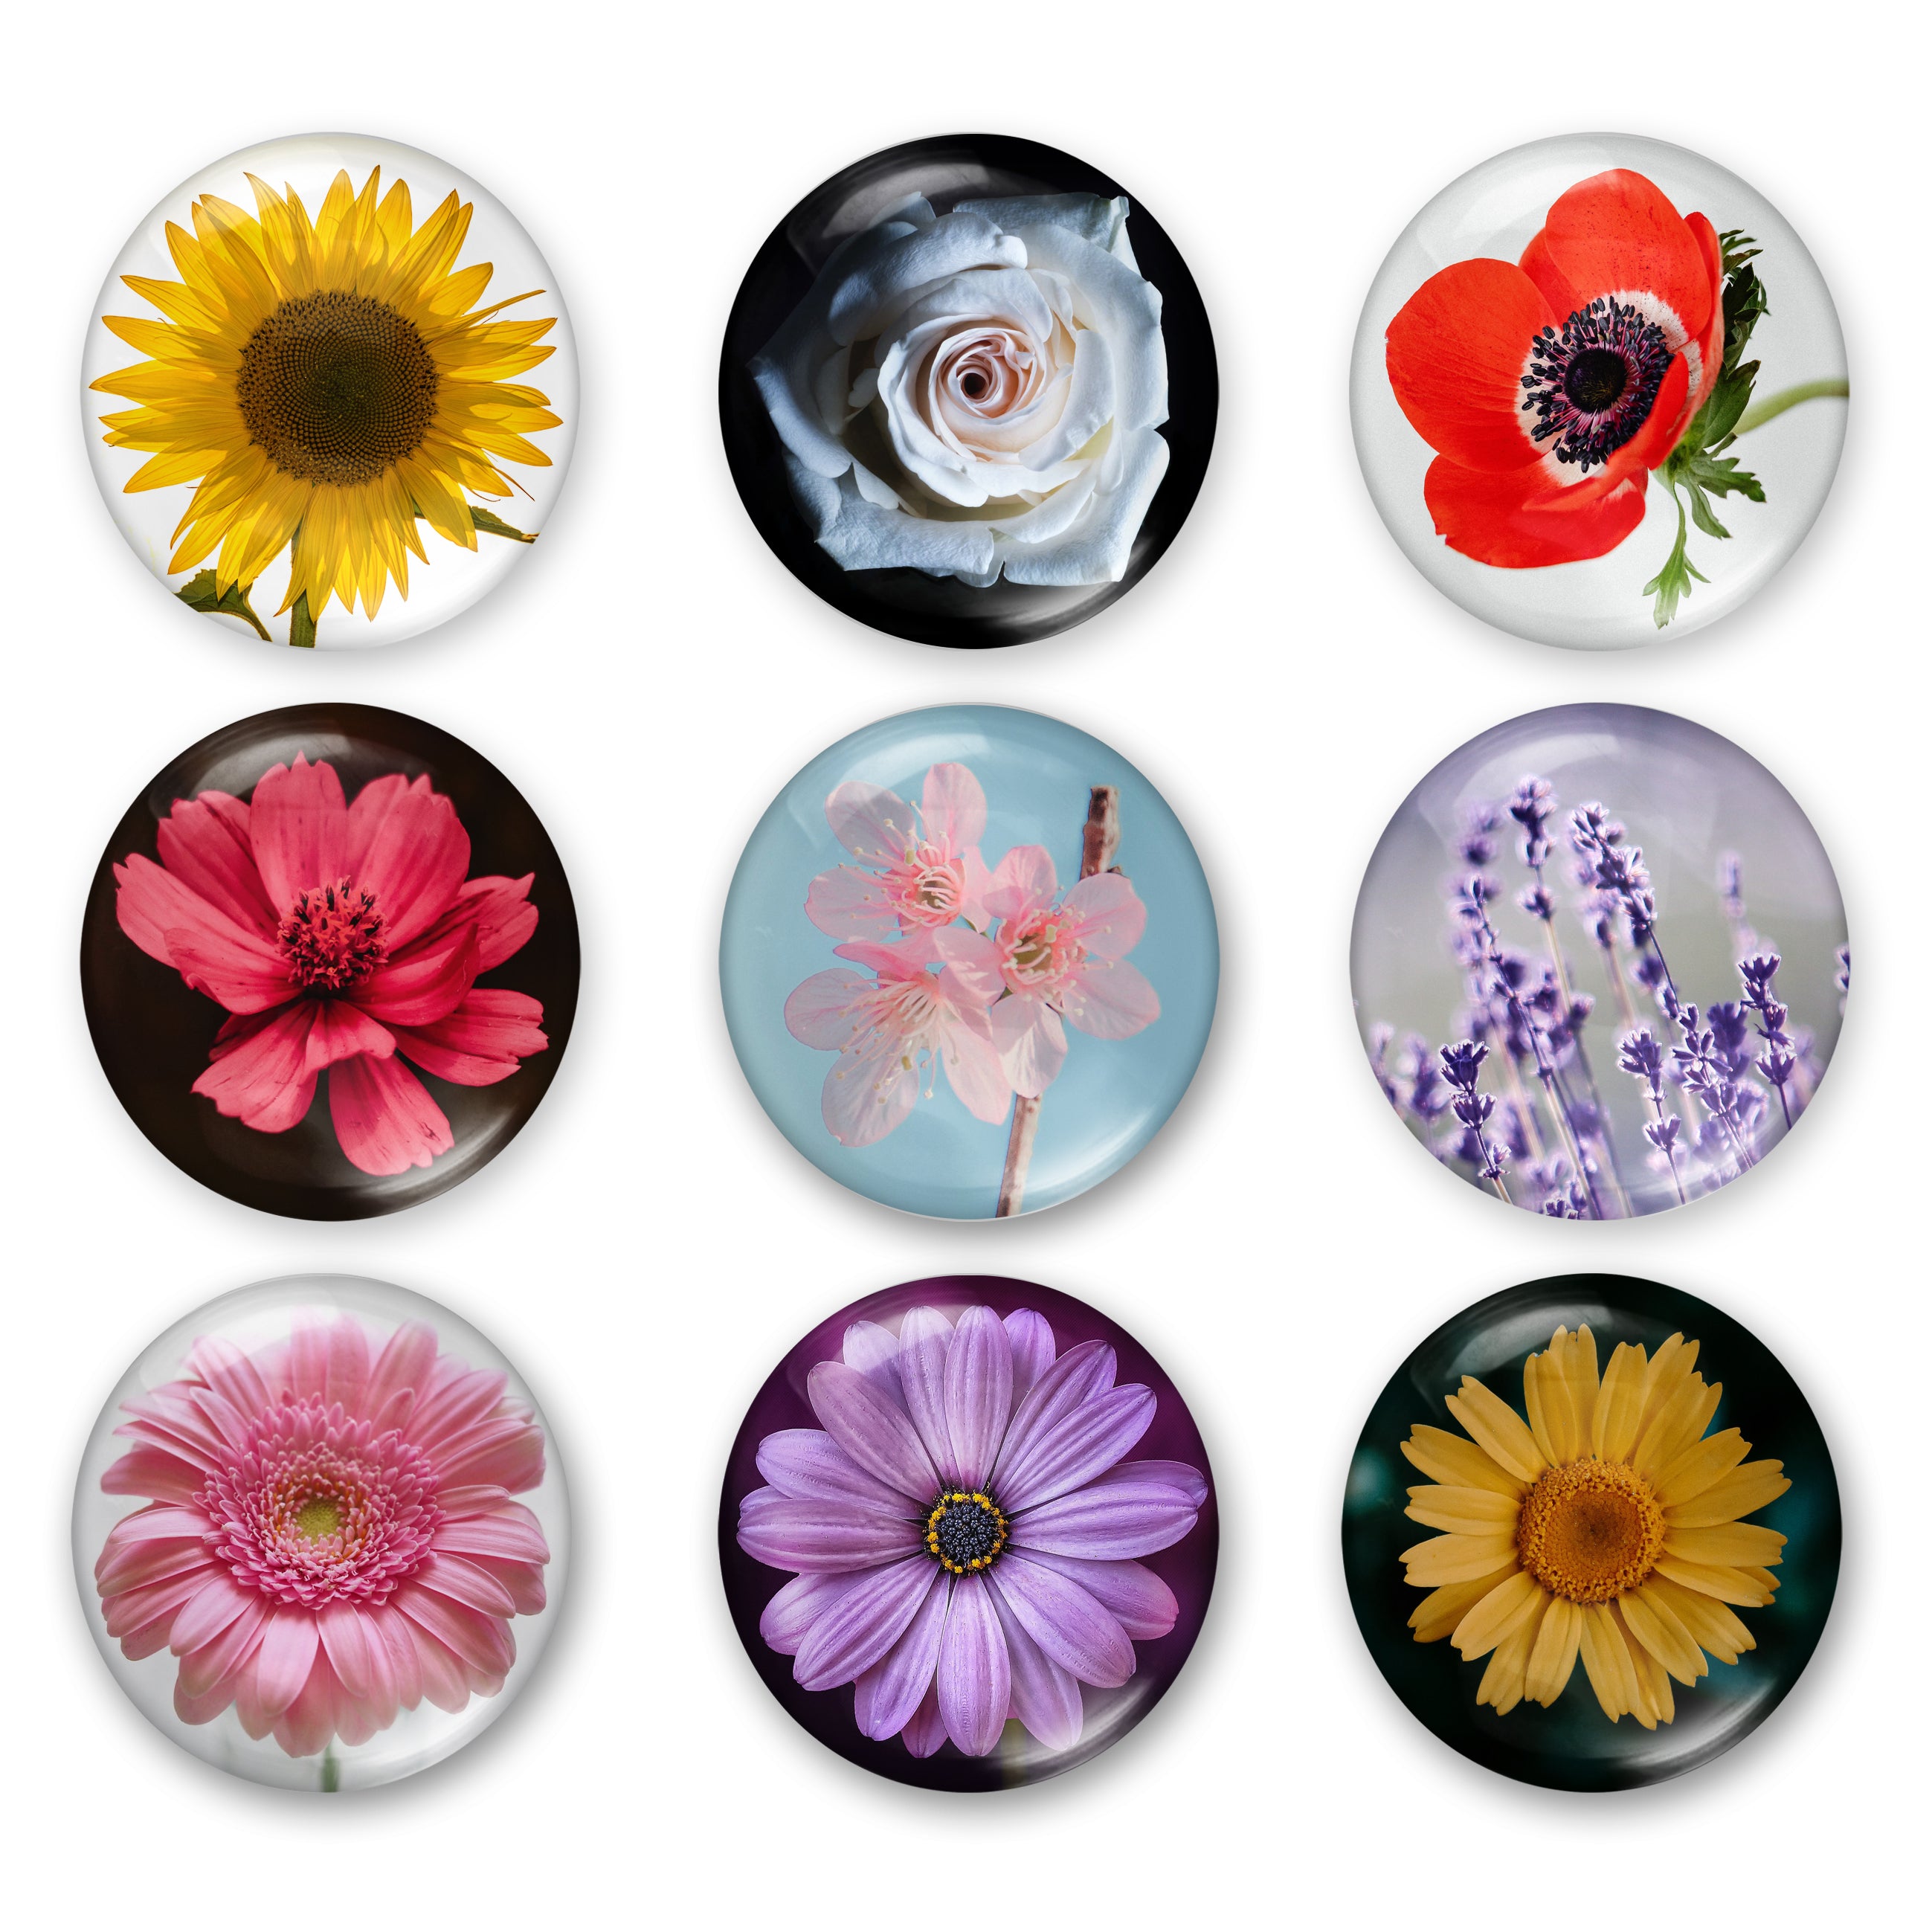 Cabochon Collage Sheet - Flowers - Printable round image in 7 sizes